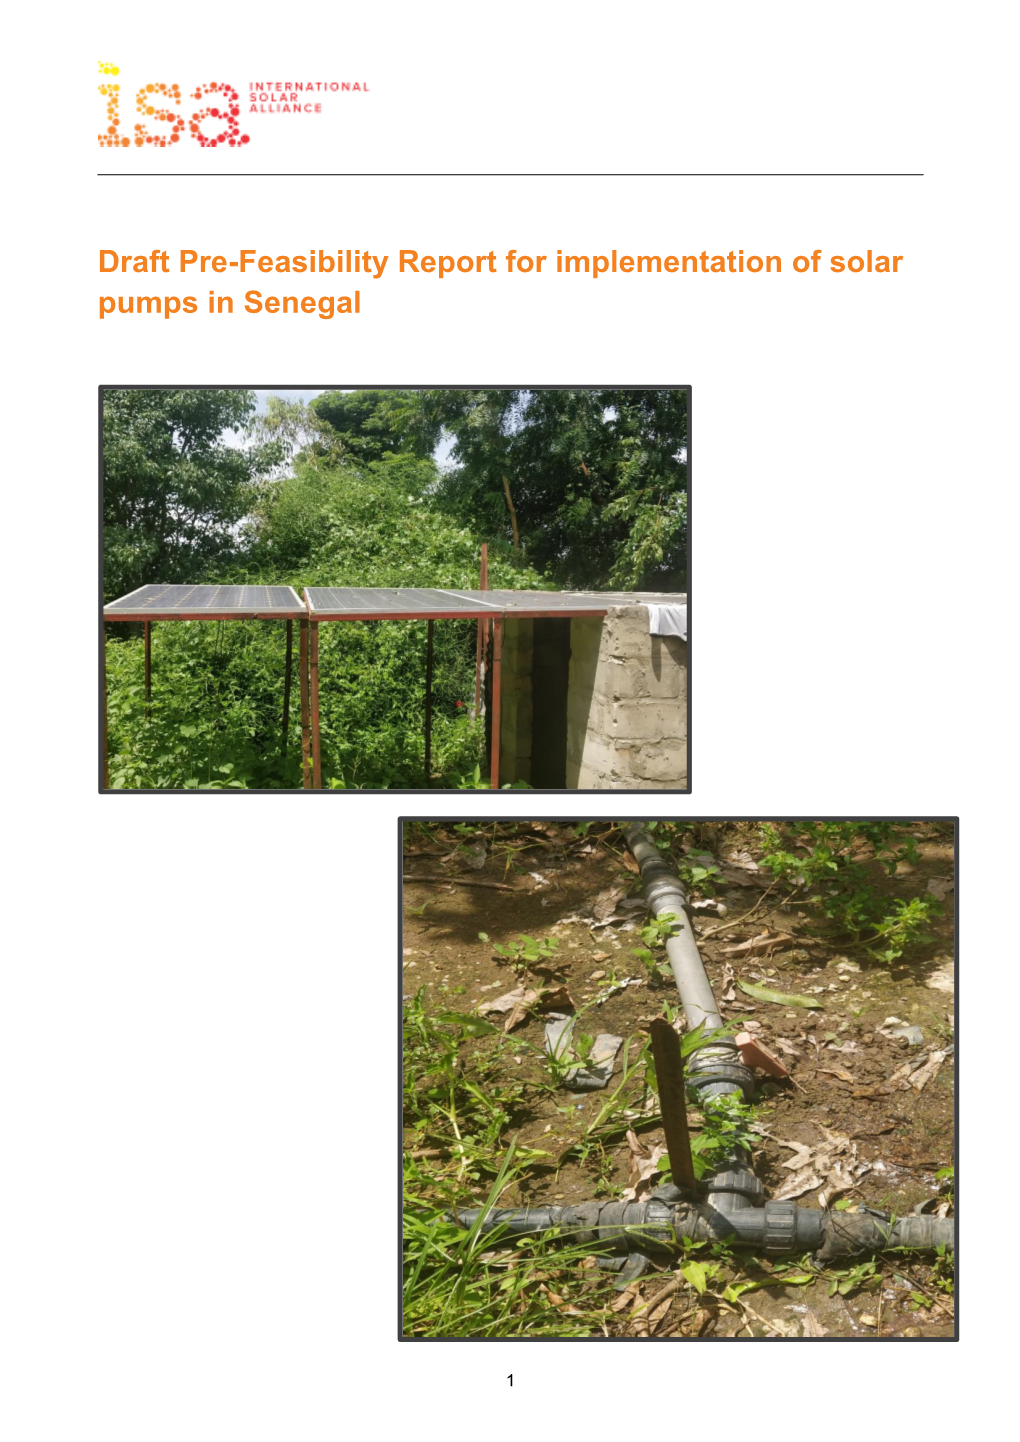 Draft Pre-Feasibility Report for Implementation of Solar Pumps in Senegal